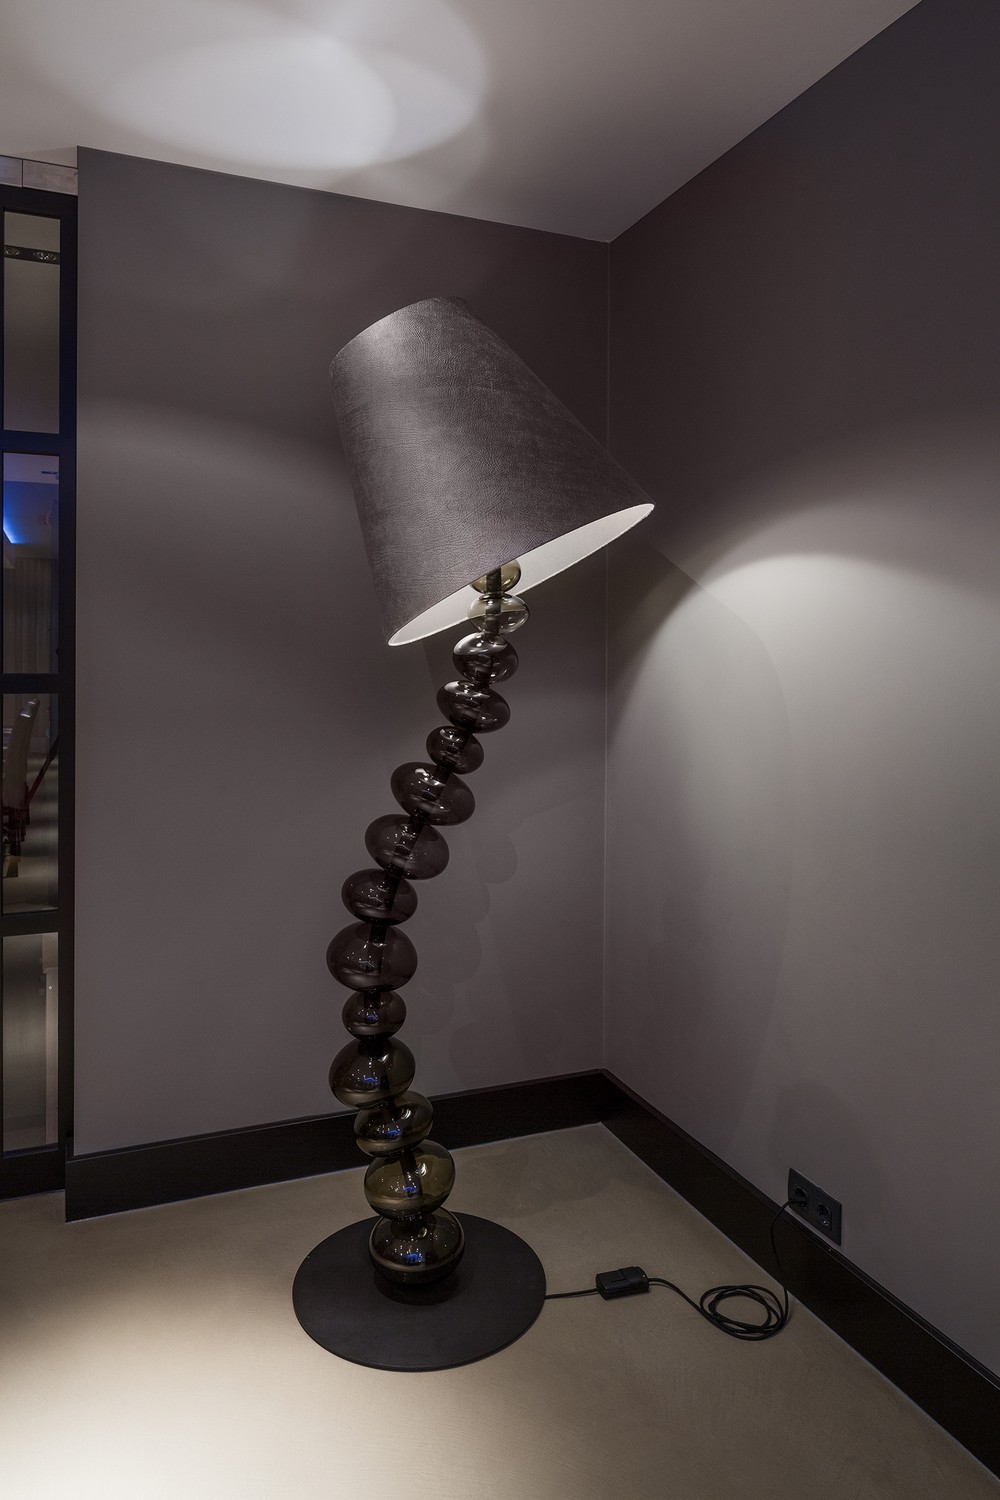 Shaped Floor Curving Unique Shaped Floor Lamp With Curving Bubbles As Lamp Handle To Enlighten The Dark Painted Rotterdam Residence Room House Designs  Contemporary Villa Interior With Sophisticated Chic Design 